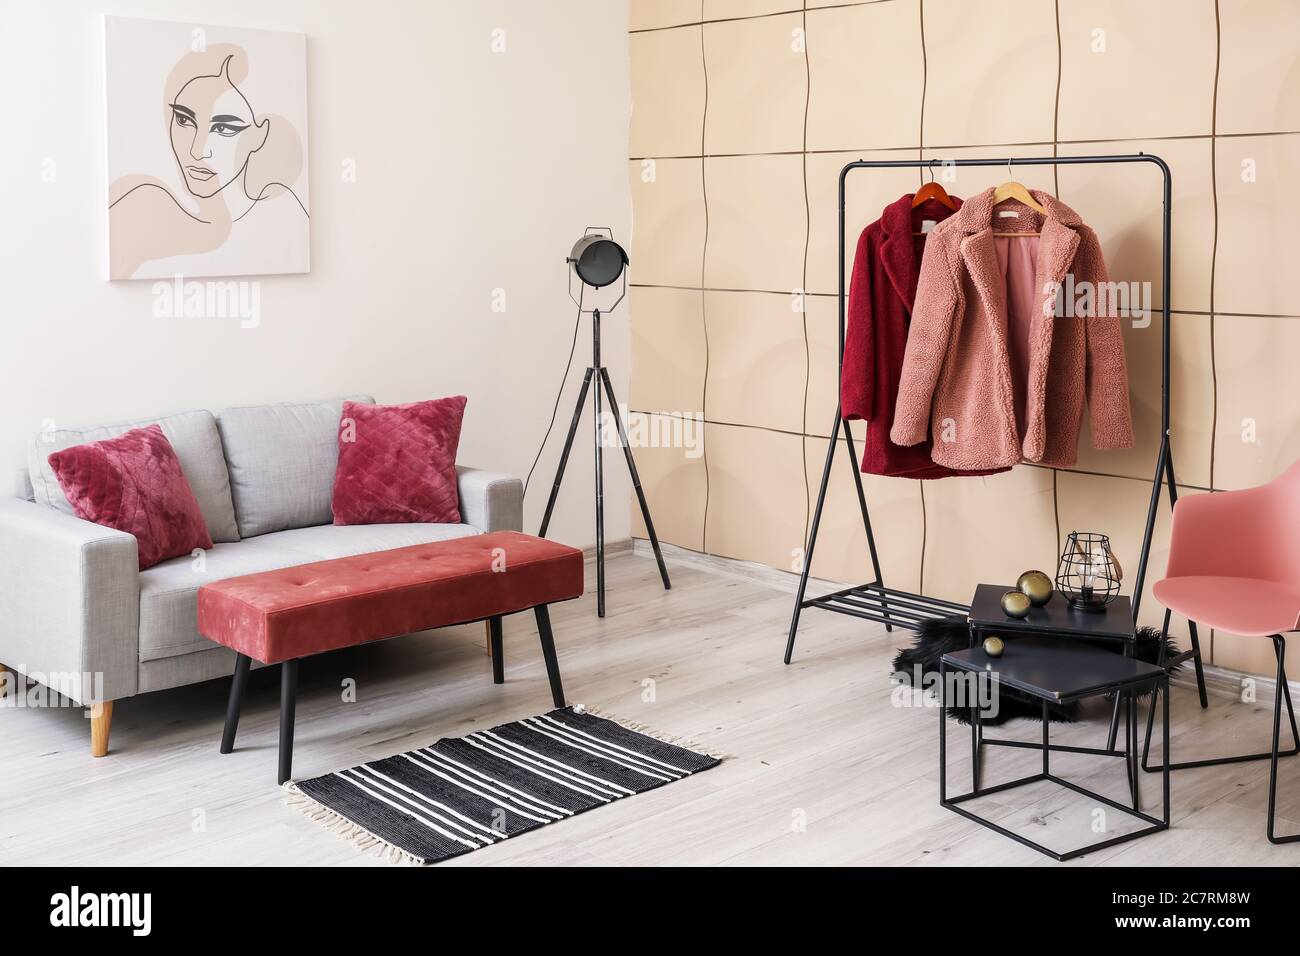 Stylish hanger with female clothes and sofa in interior of room Stock Photo  - Alamy